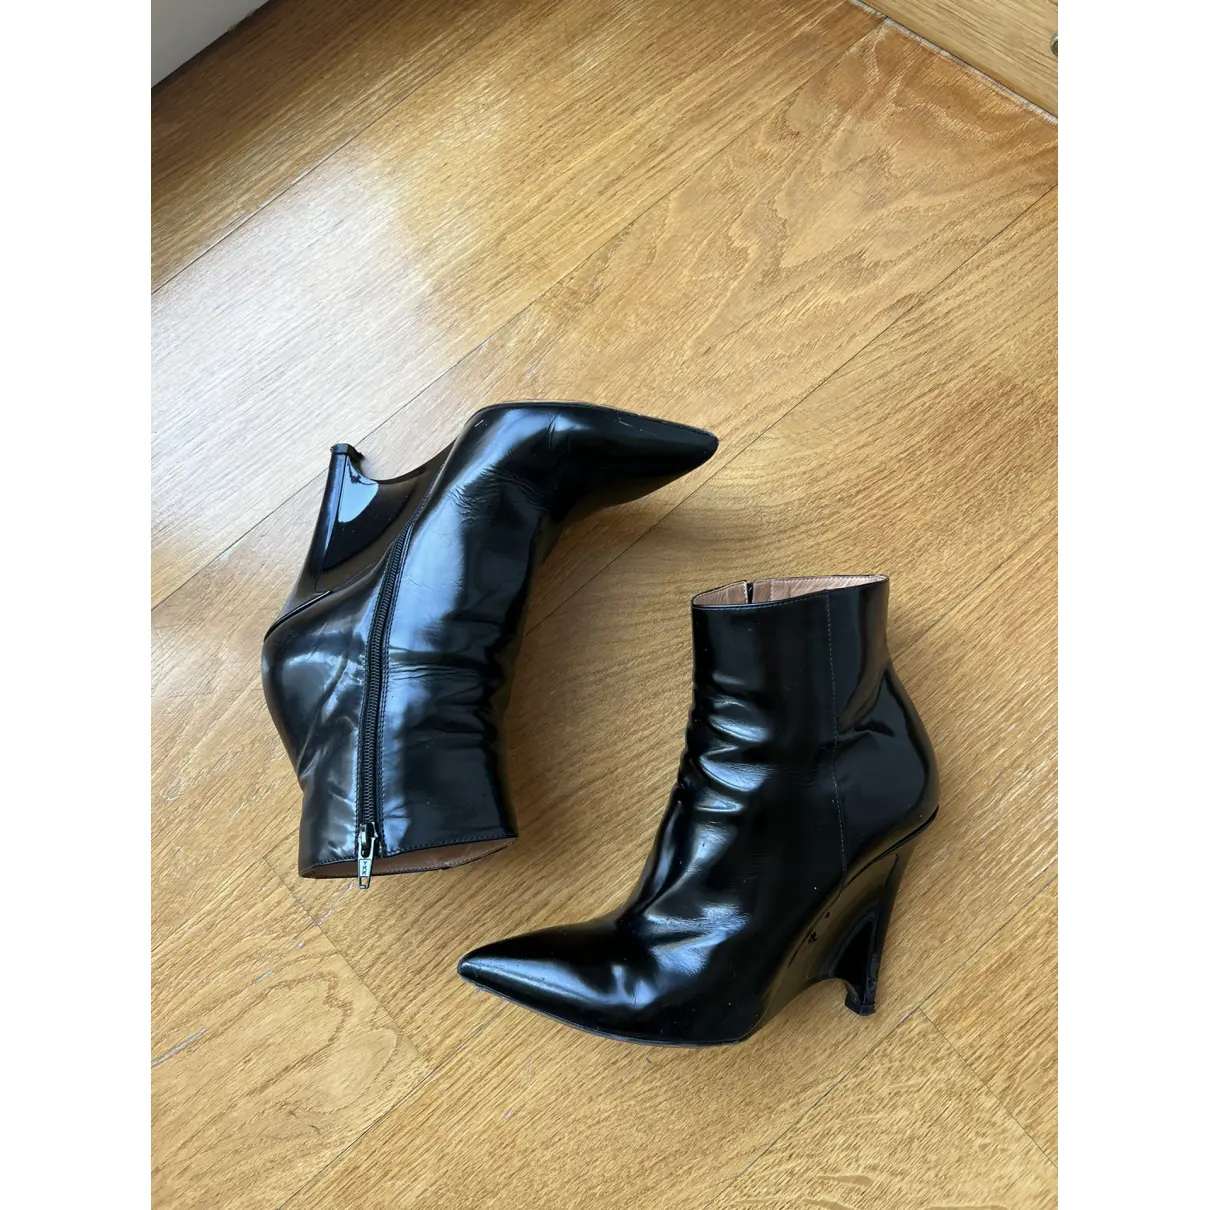 Buy Maison Martin Margiela Patent leather ankle boots online